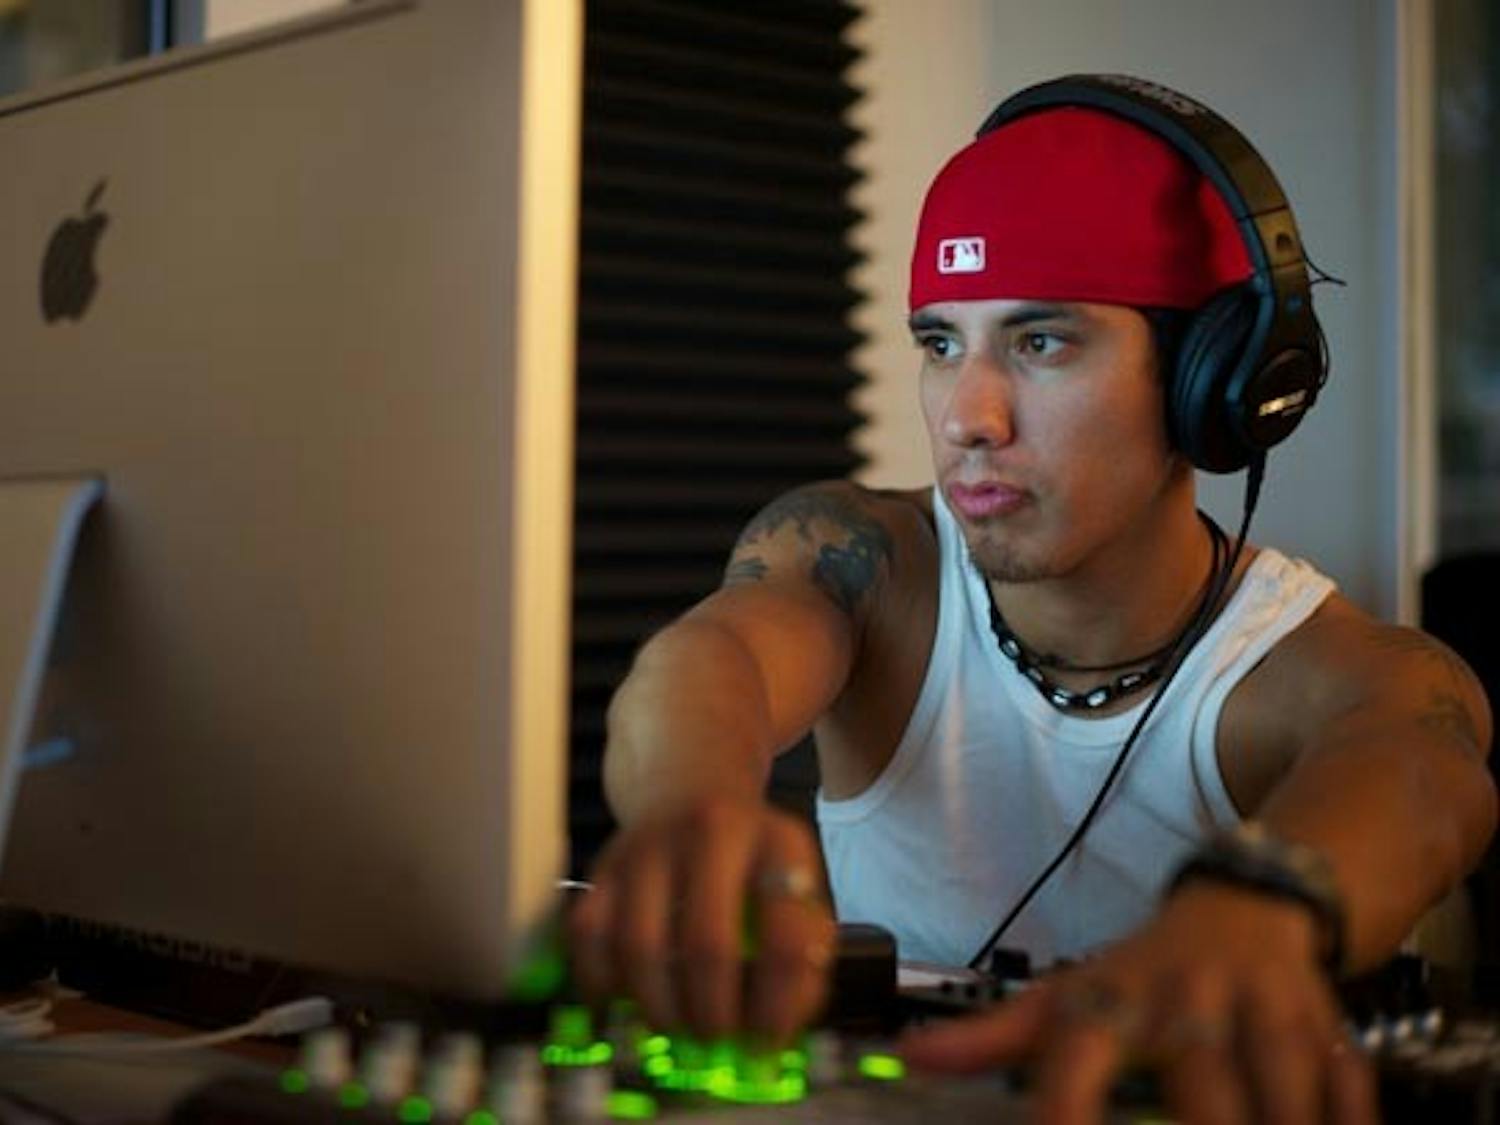 CREATING MUSIC: Sergio Castillo, a senior business communications major and graduate student of the Sequence music program, records a track in the studio. Sequence was founded by ASU alum (and current CEO) Brandon Weinberger, who graduated in 2009. (Photo by Michael Arellano)